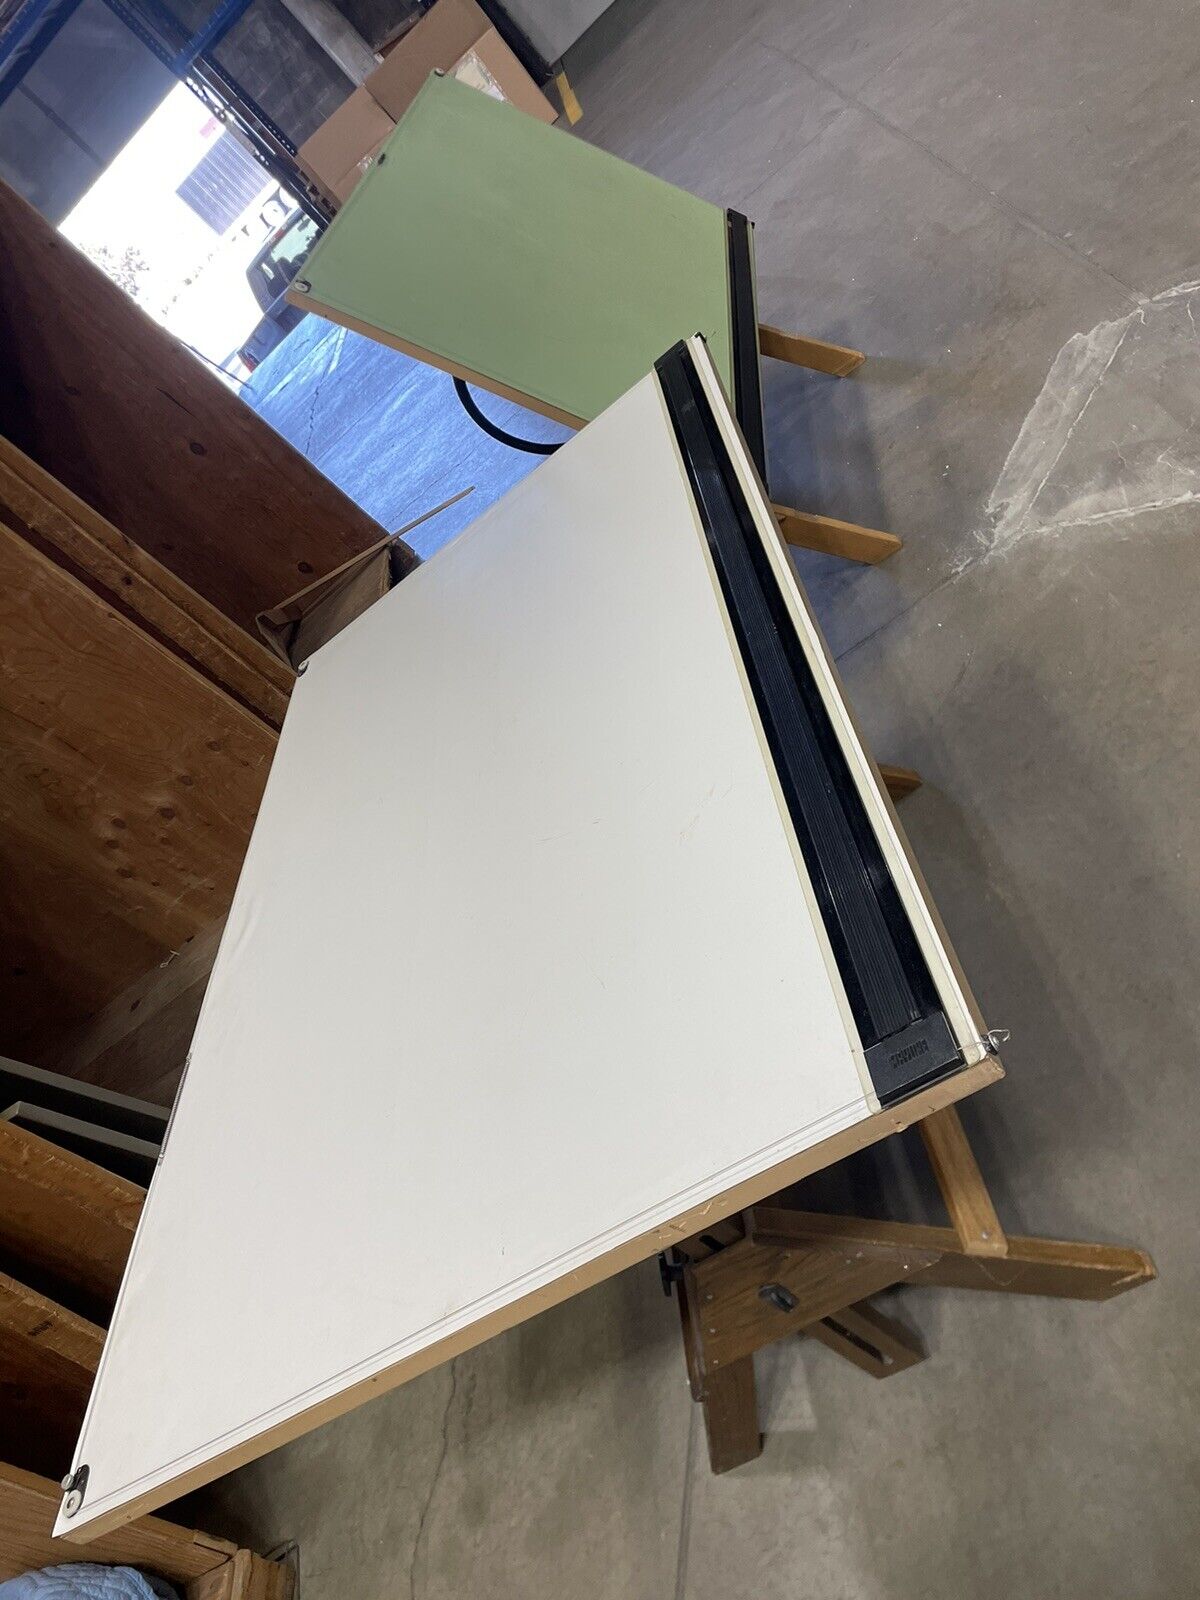 2 Adjustable Drafting Tables (Local Pickup) (Will Deliver For A Fee)